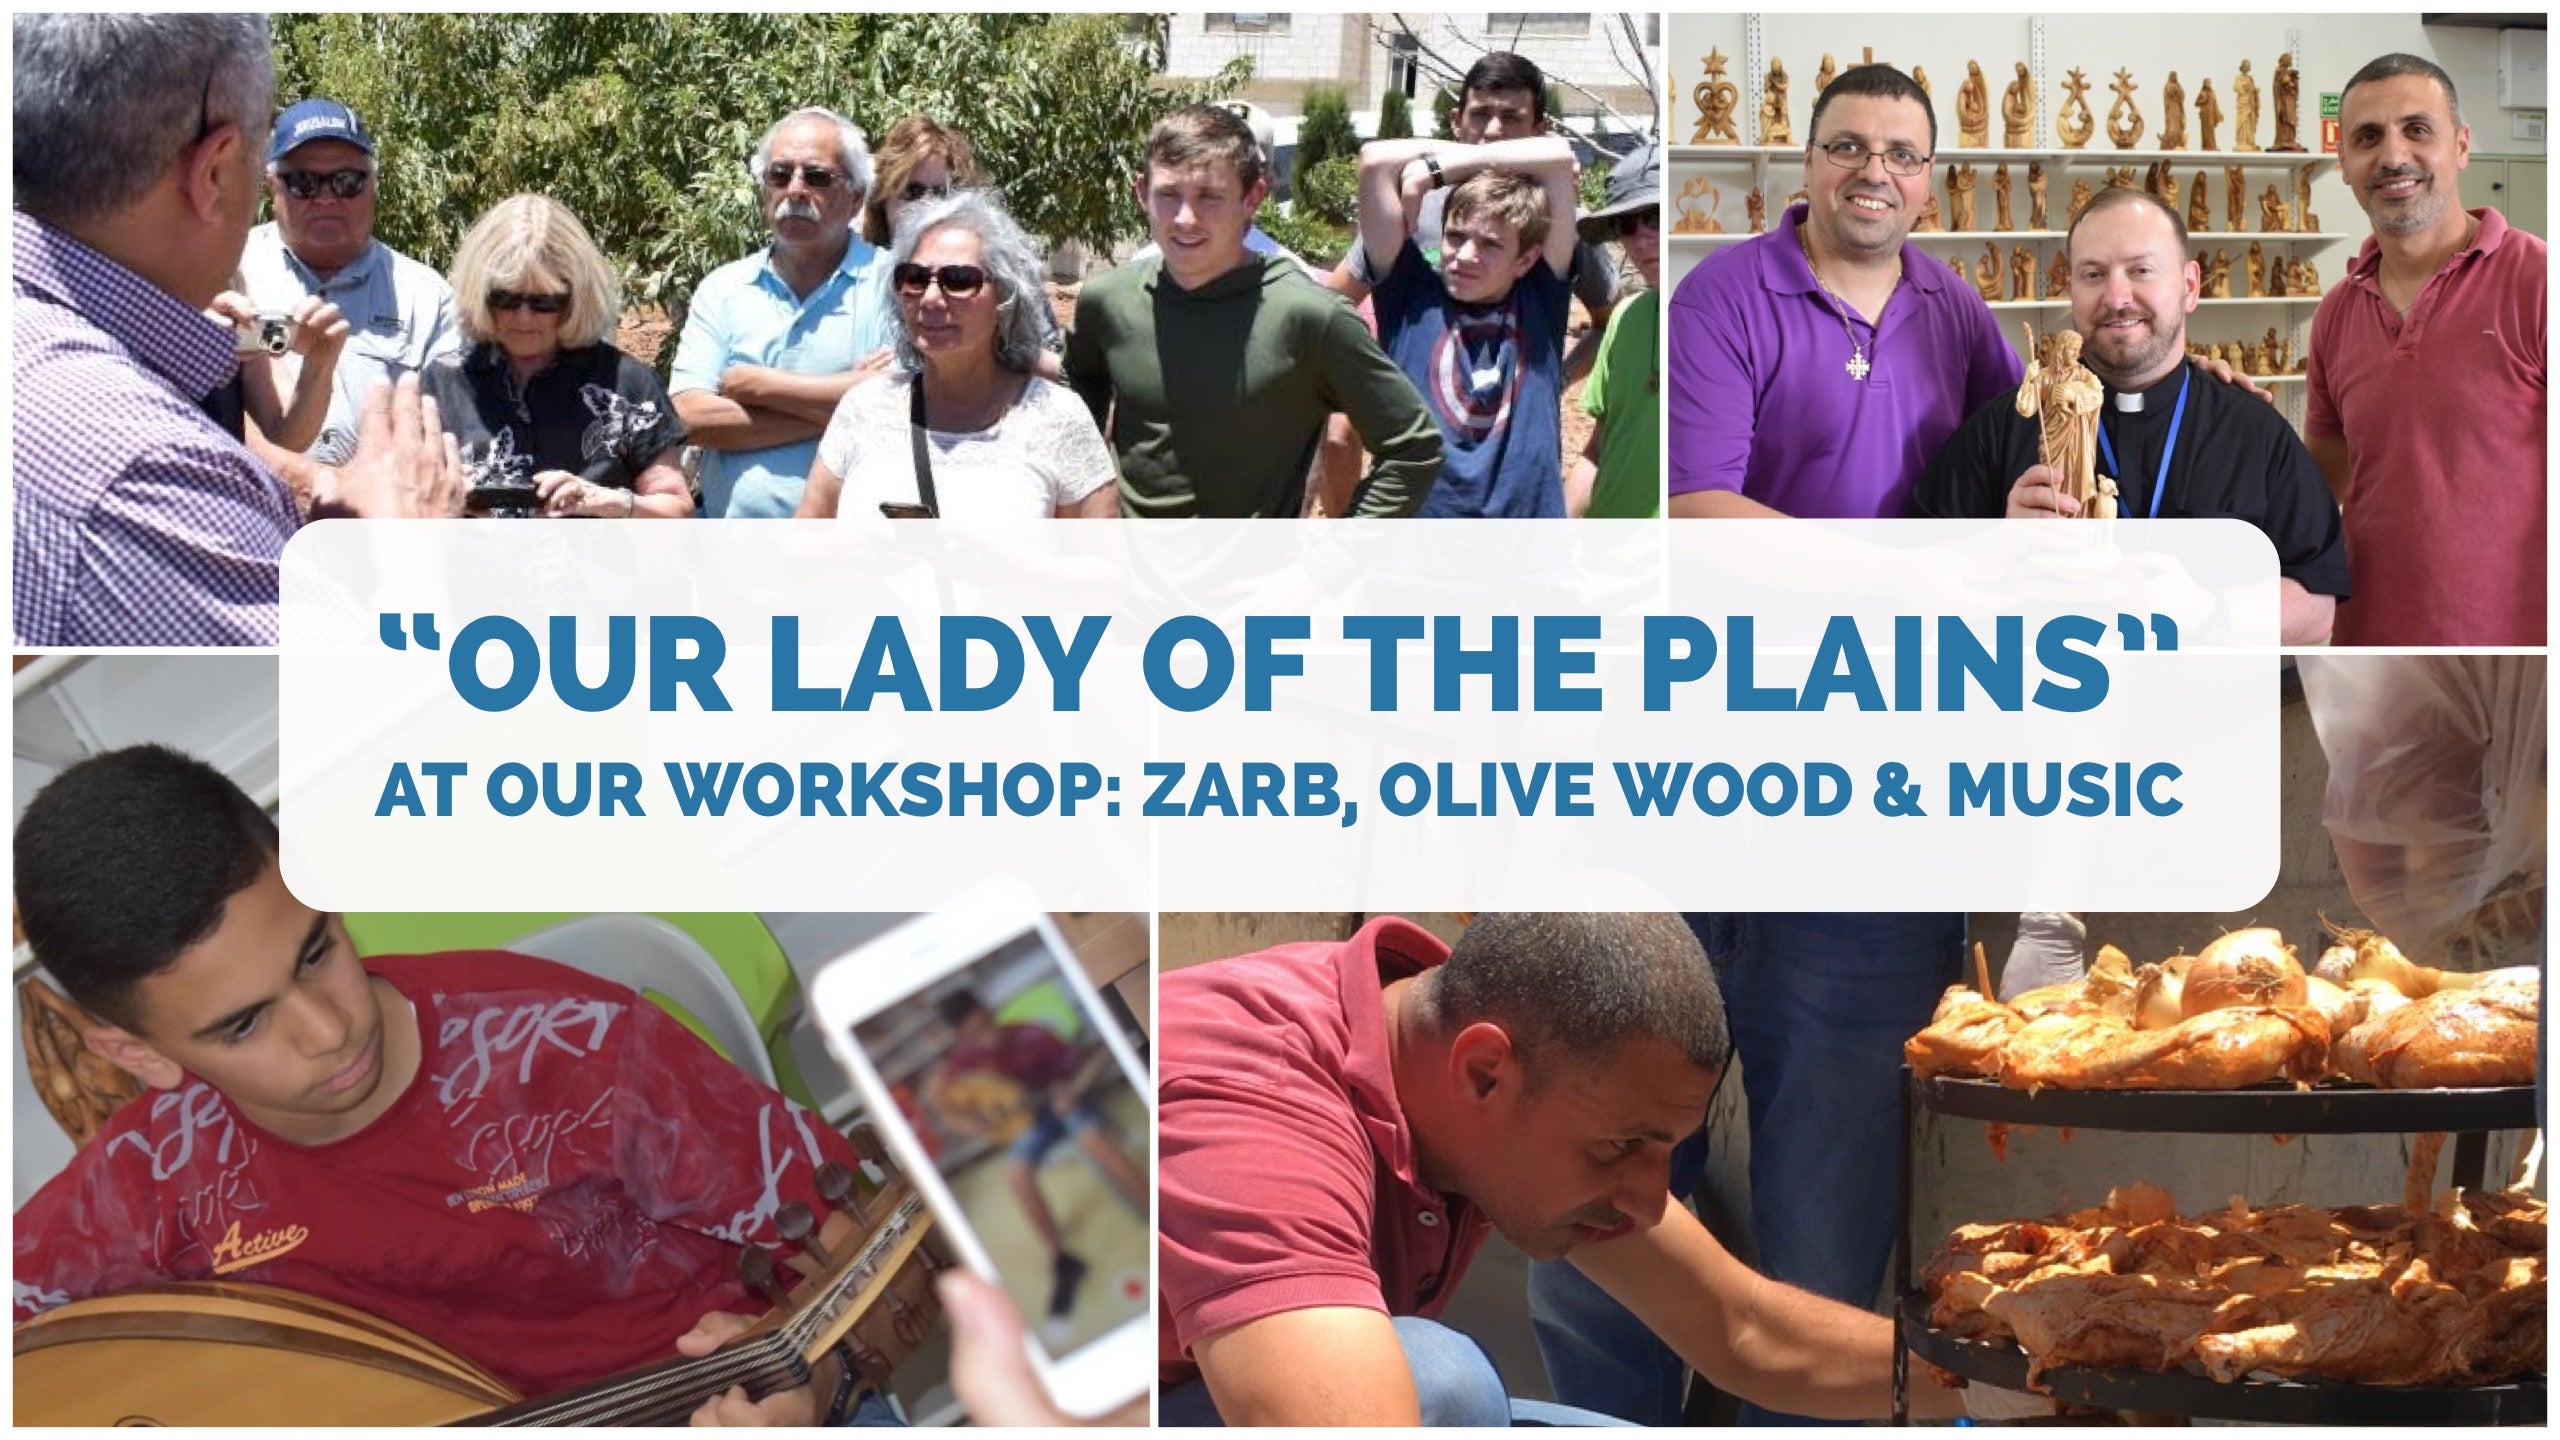 Our Lady of the Plains at our Workshop: Zarb, Olive Wood & Music